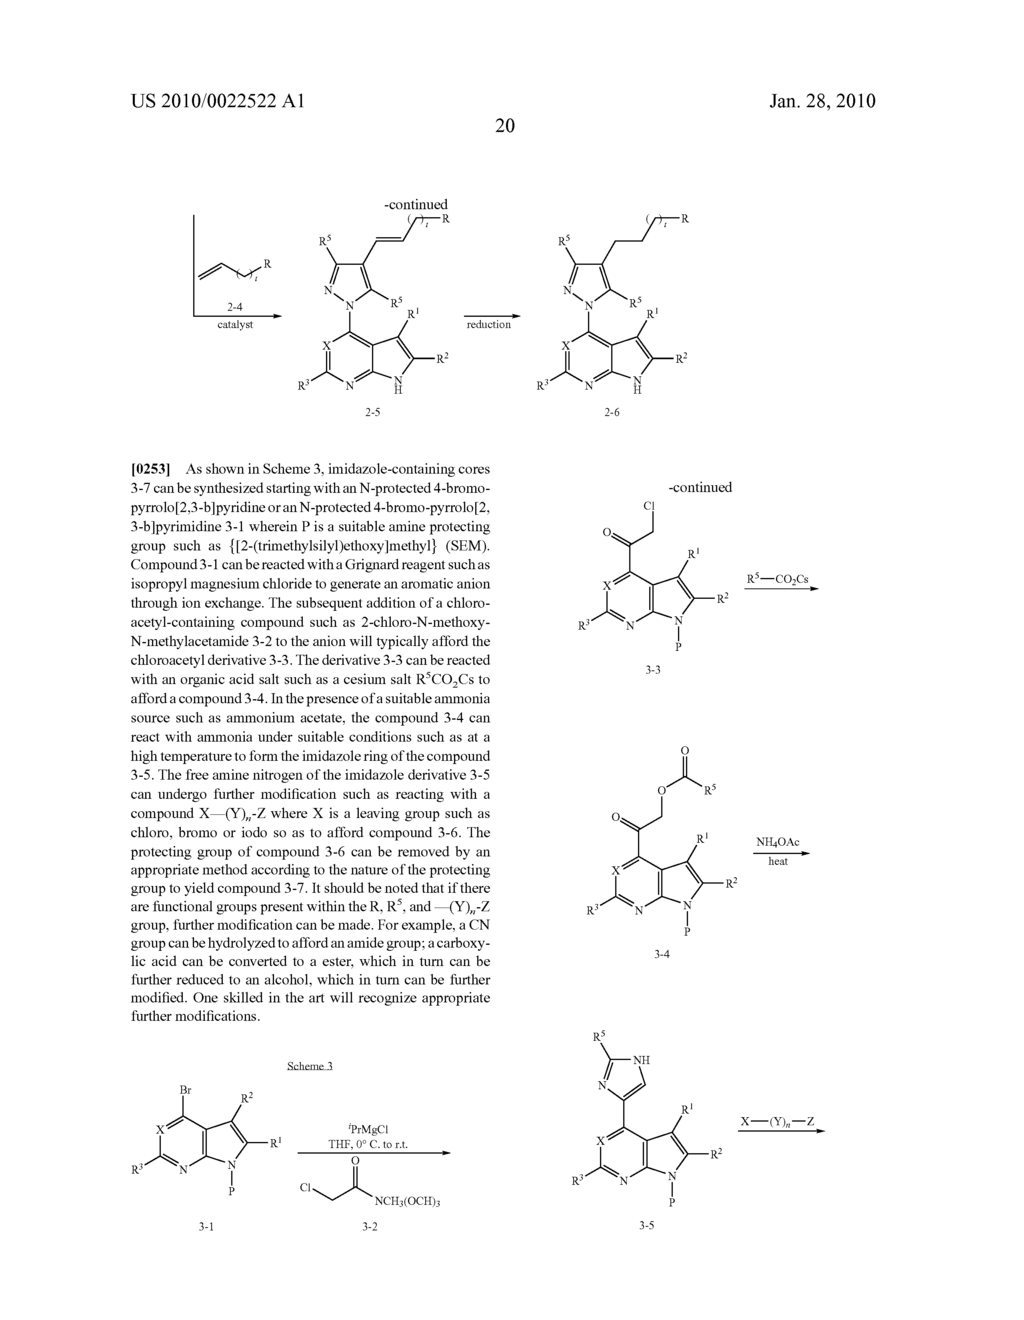 HETEROARYL SUBSTITUTED PYRROLO[2,3-b]PYRIDINES AND PYRROLO[2,3-b]PYRIMIDINES AS JANUS KINASE INHIBITORS - diagram, schematic, and image 21